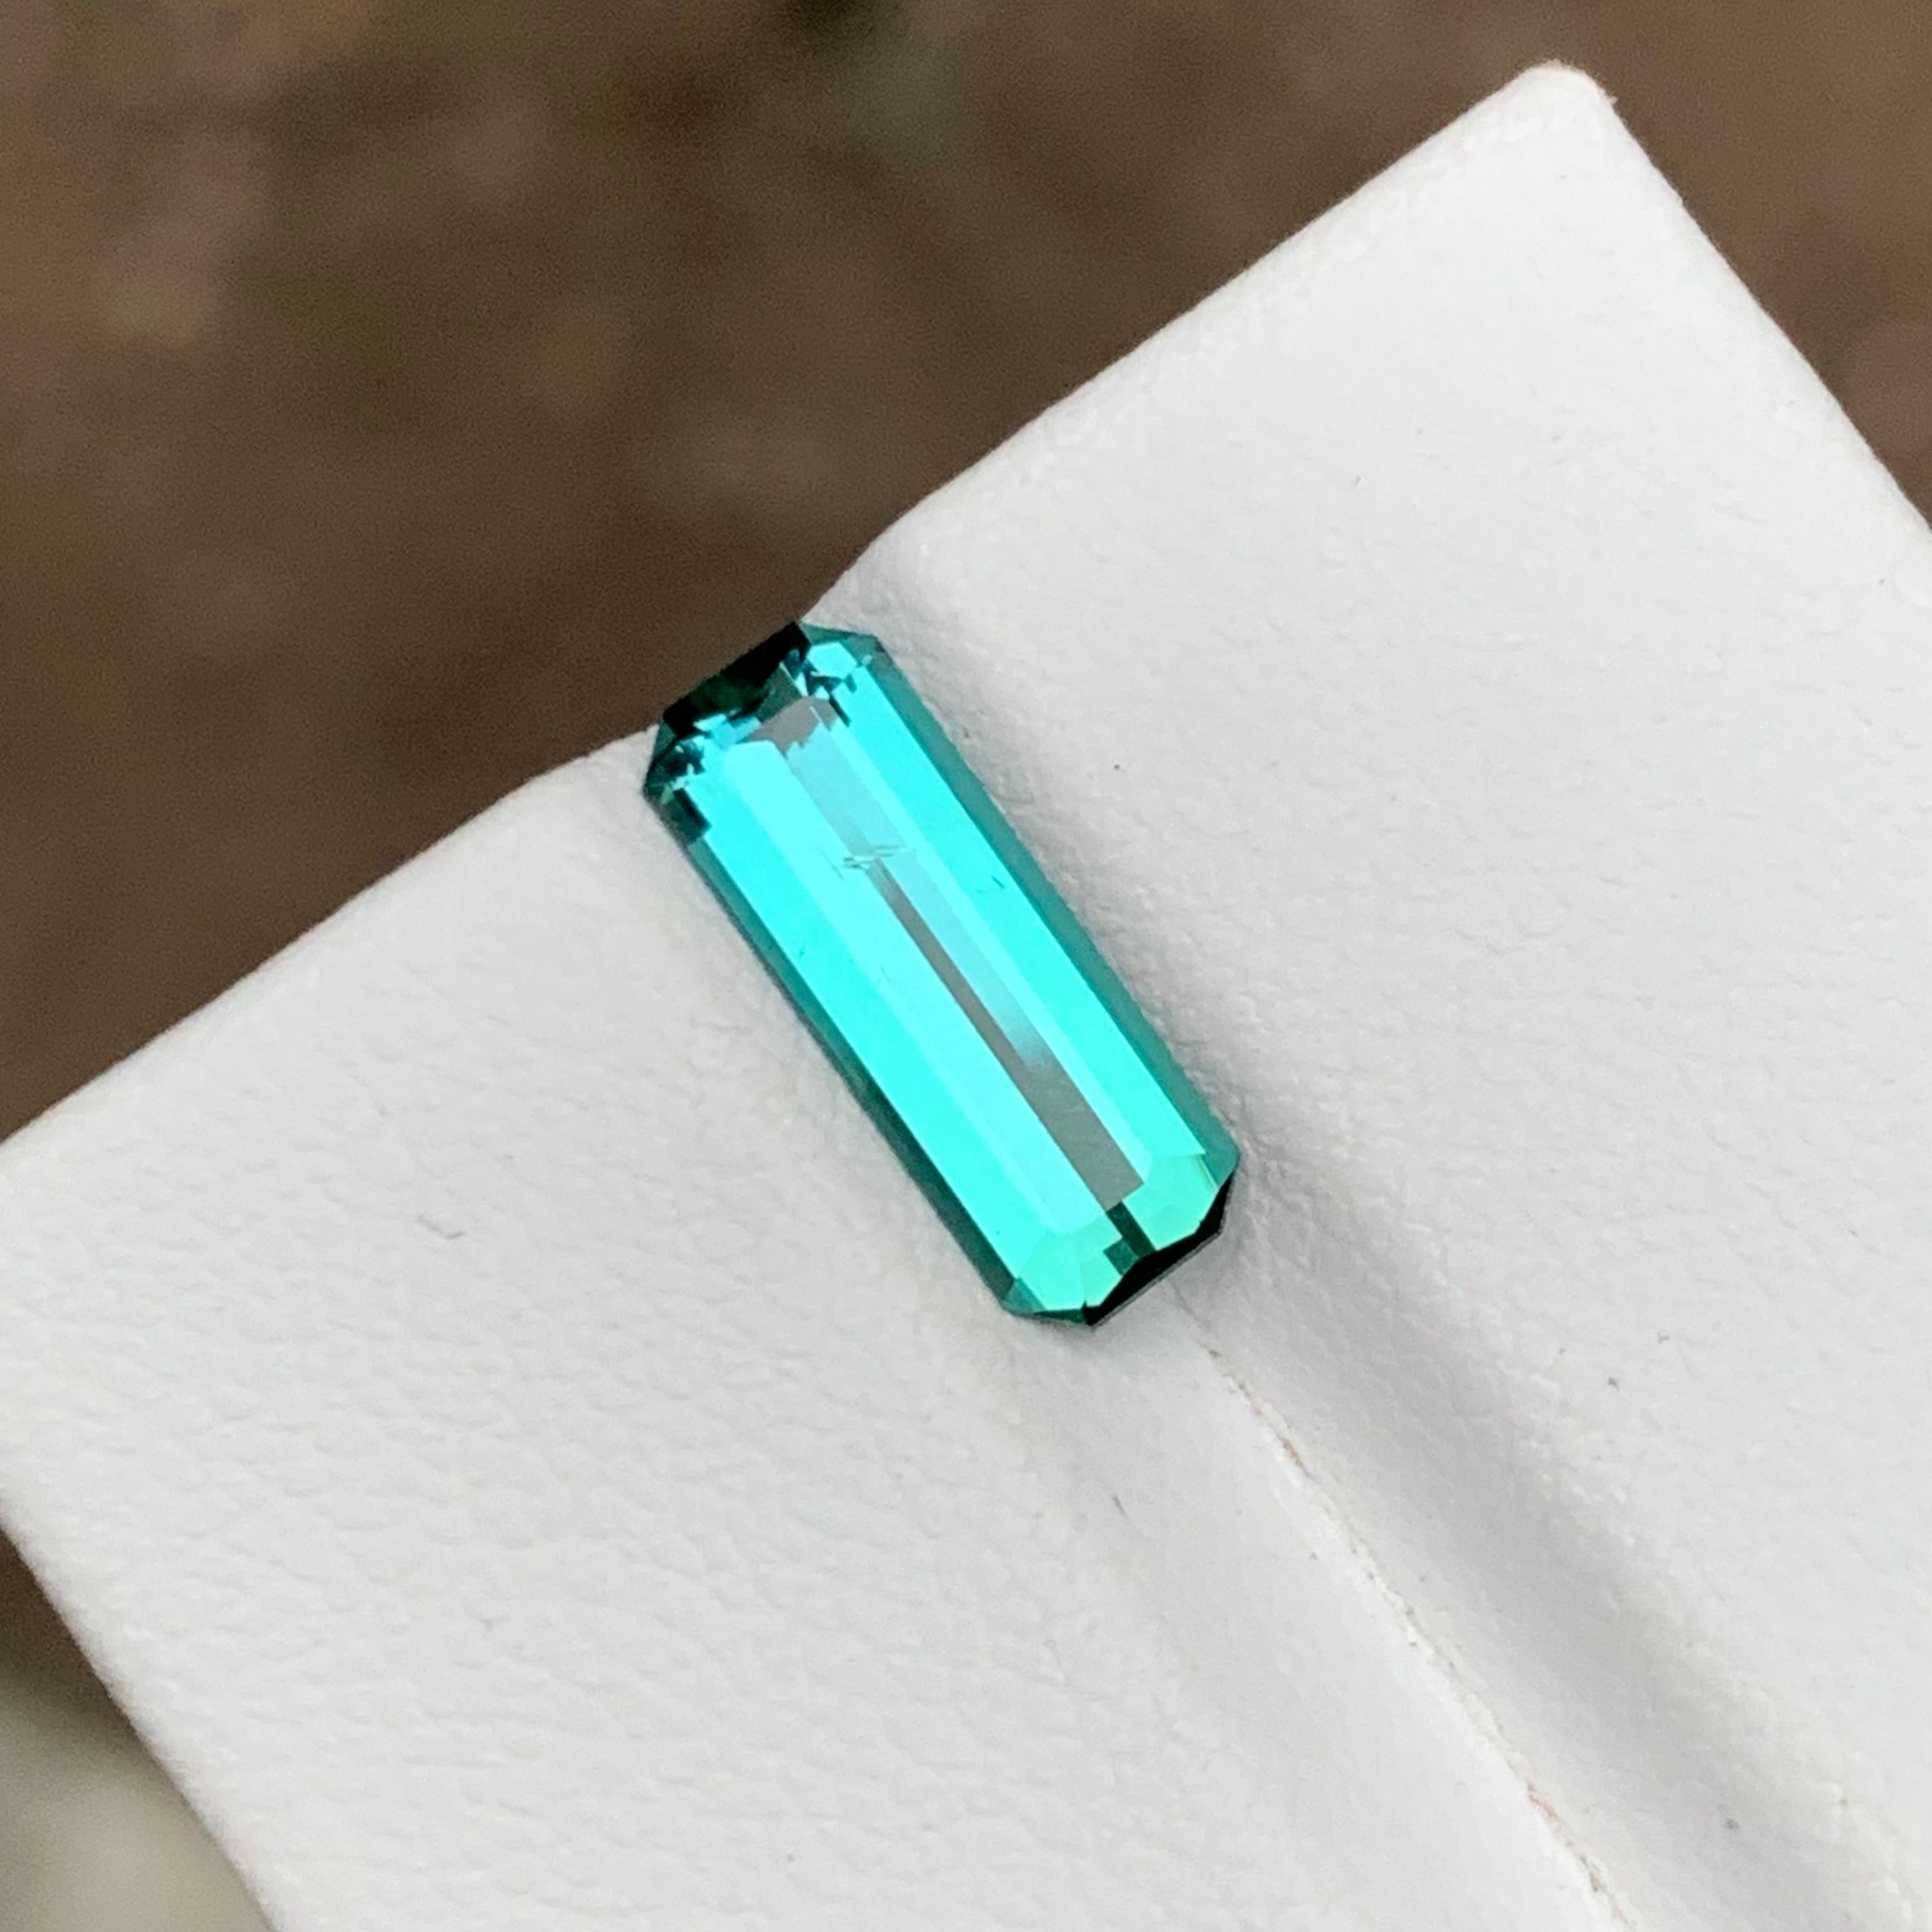 GEMSTONE TYPE: Tourmaline
PIECE(S): 1
WEIGHT: 1.75 Carat
SHAPE: Emerald
SIZE (MM): 12.93 x 4.80 x 3.24
COLOR: Vivid Neon Blue
CLARITY: Approx 95% Eye Clean
TREATMENT: None
ORIGIN: Afghanistan
CERTIFICATE: On demand

Introducing a rare and exquisite